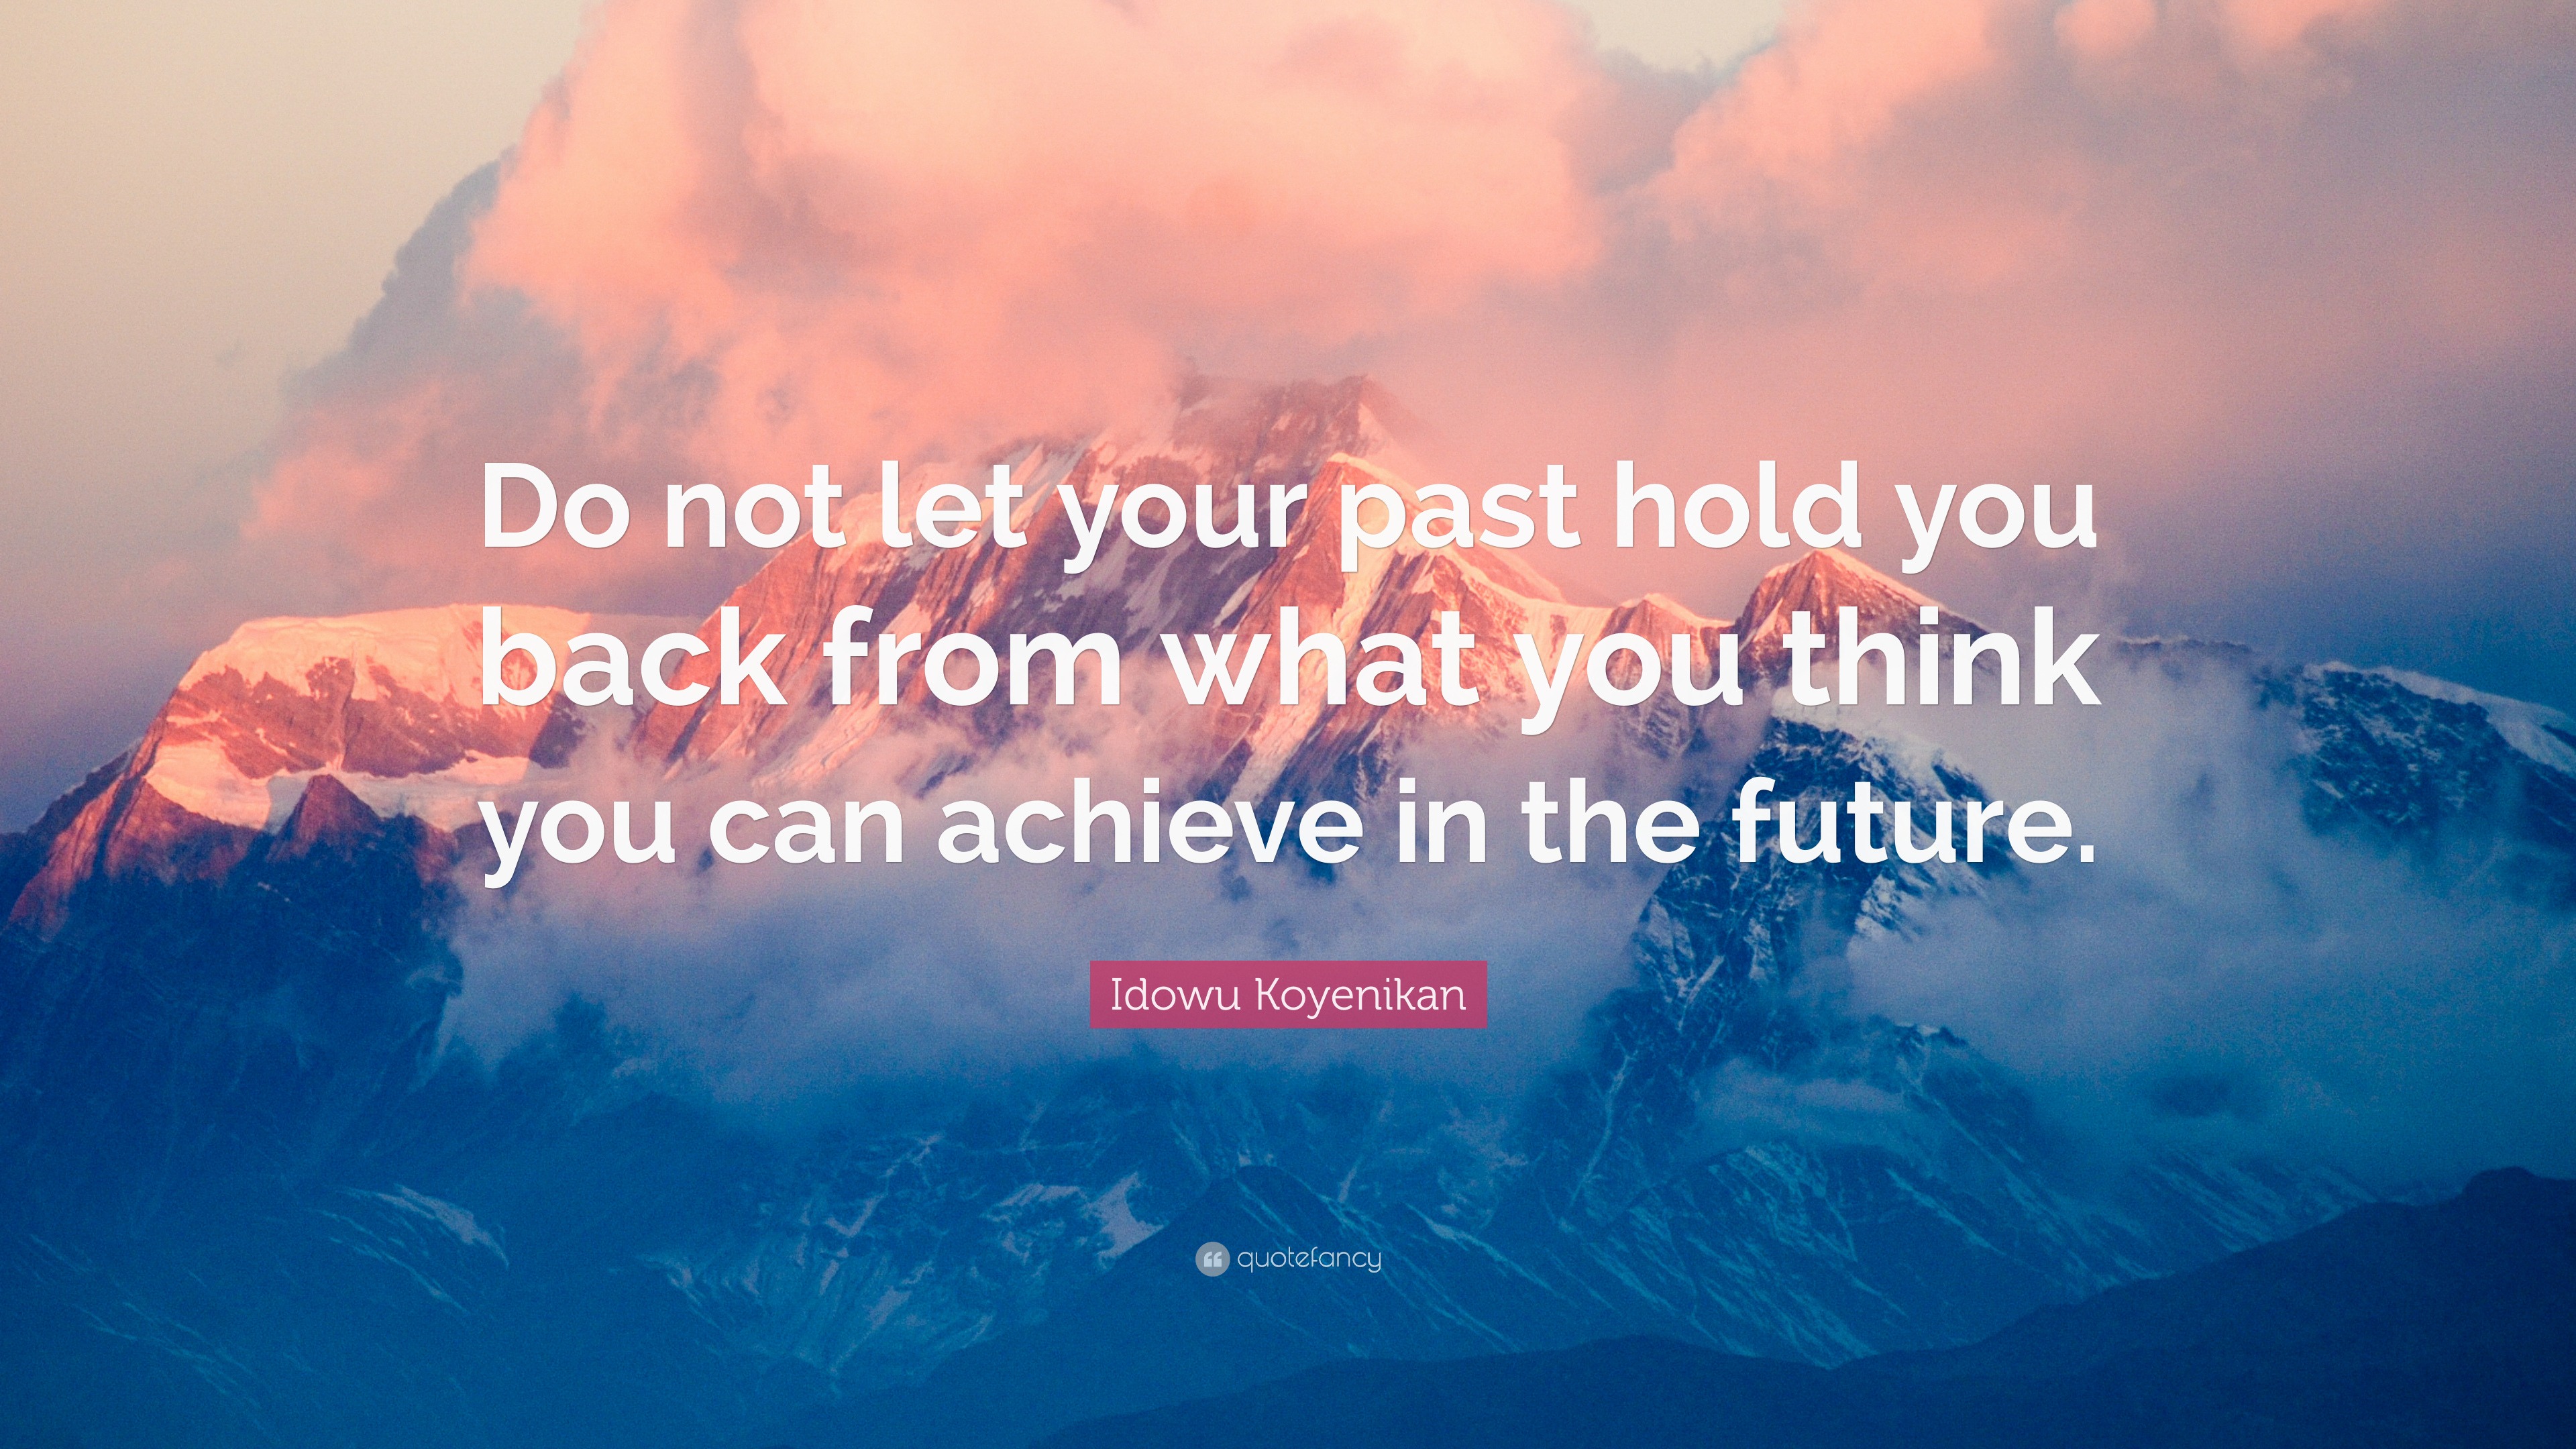 Idowu Koyenikan Quote: “Do not let your past hold you back from what